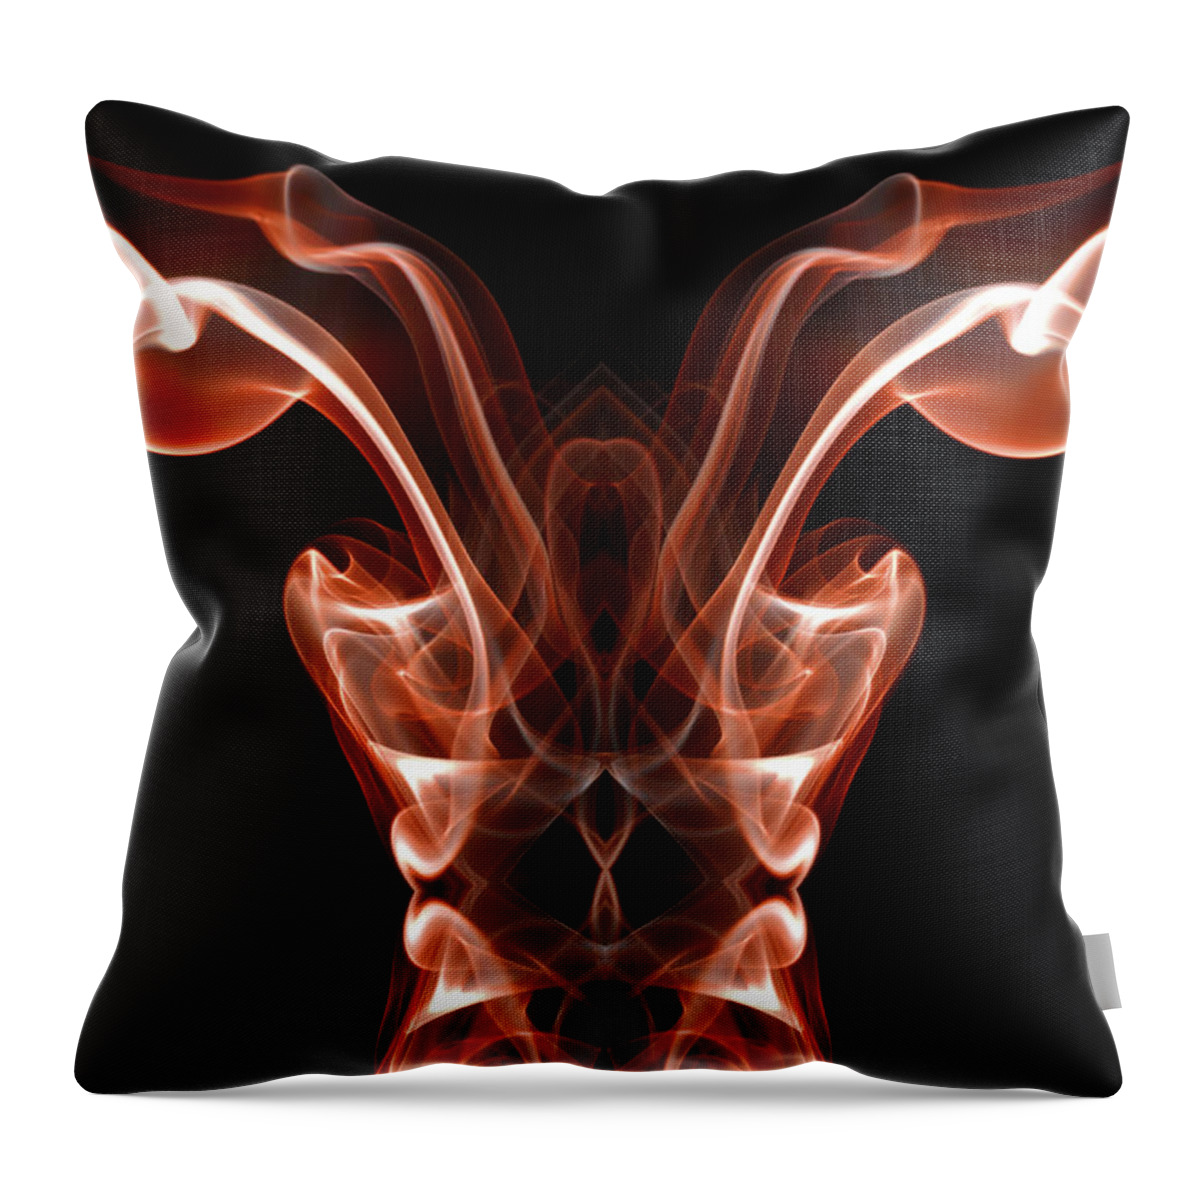 Anatomy Throw Pillow featuring the photograph Alien Anatomy by David Crausby